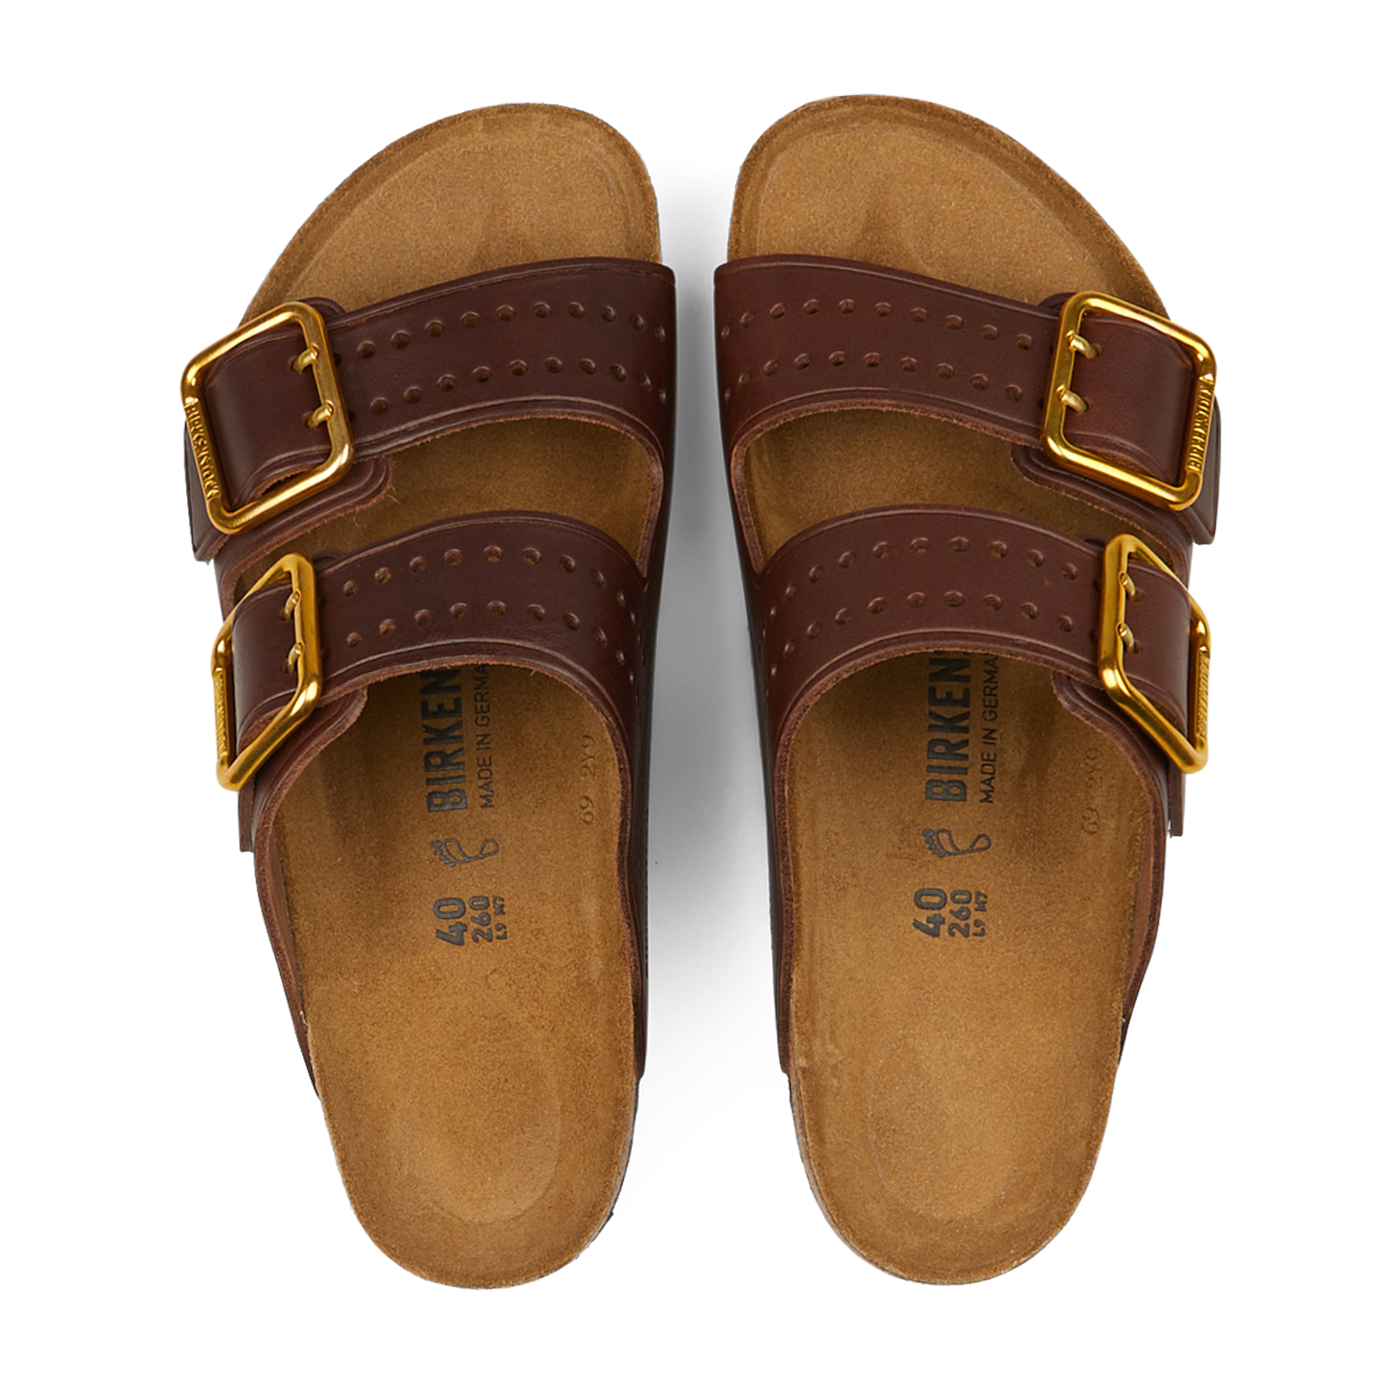 A pair of Roast Bold Natural Leather Birkenstock Arizona Sandals featuring two gold buckles on each natural leather upper strap and cork footbeds with anatomically-supported footbeds. Size details printed on the inner sole.